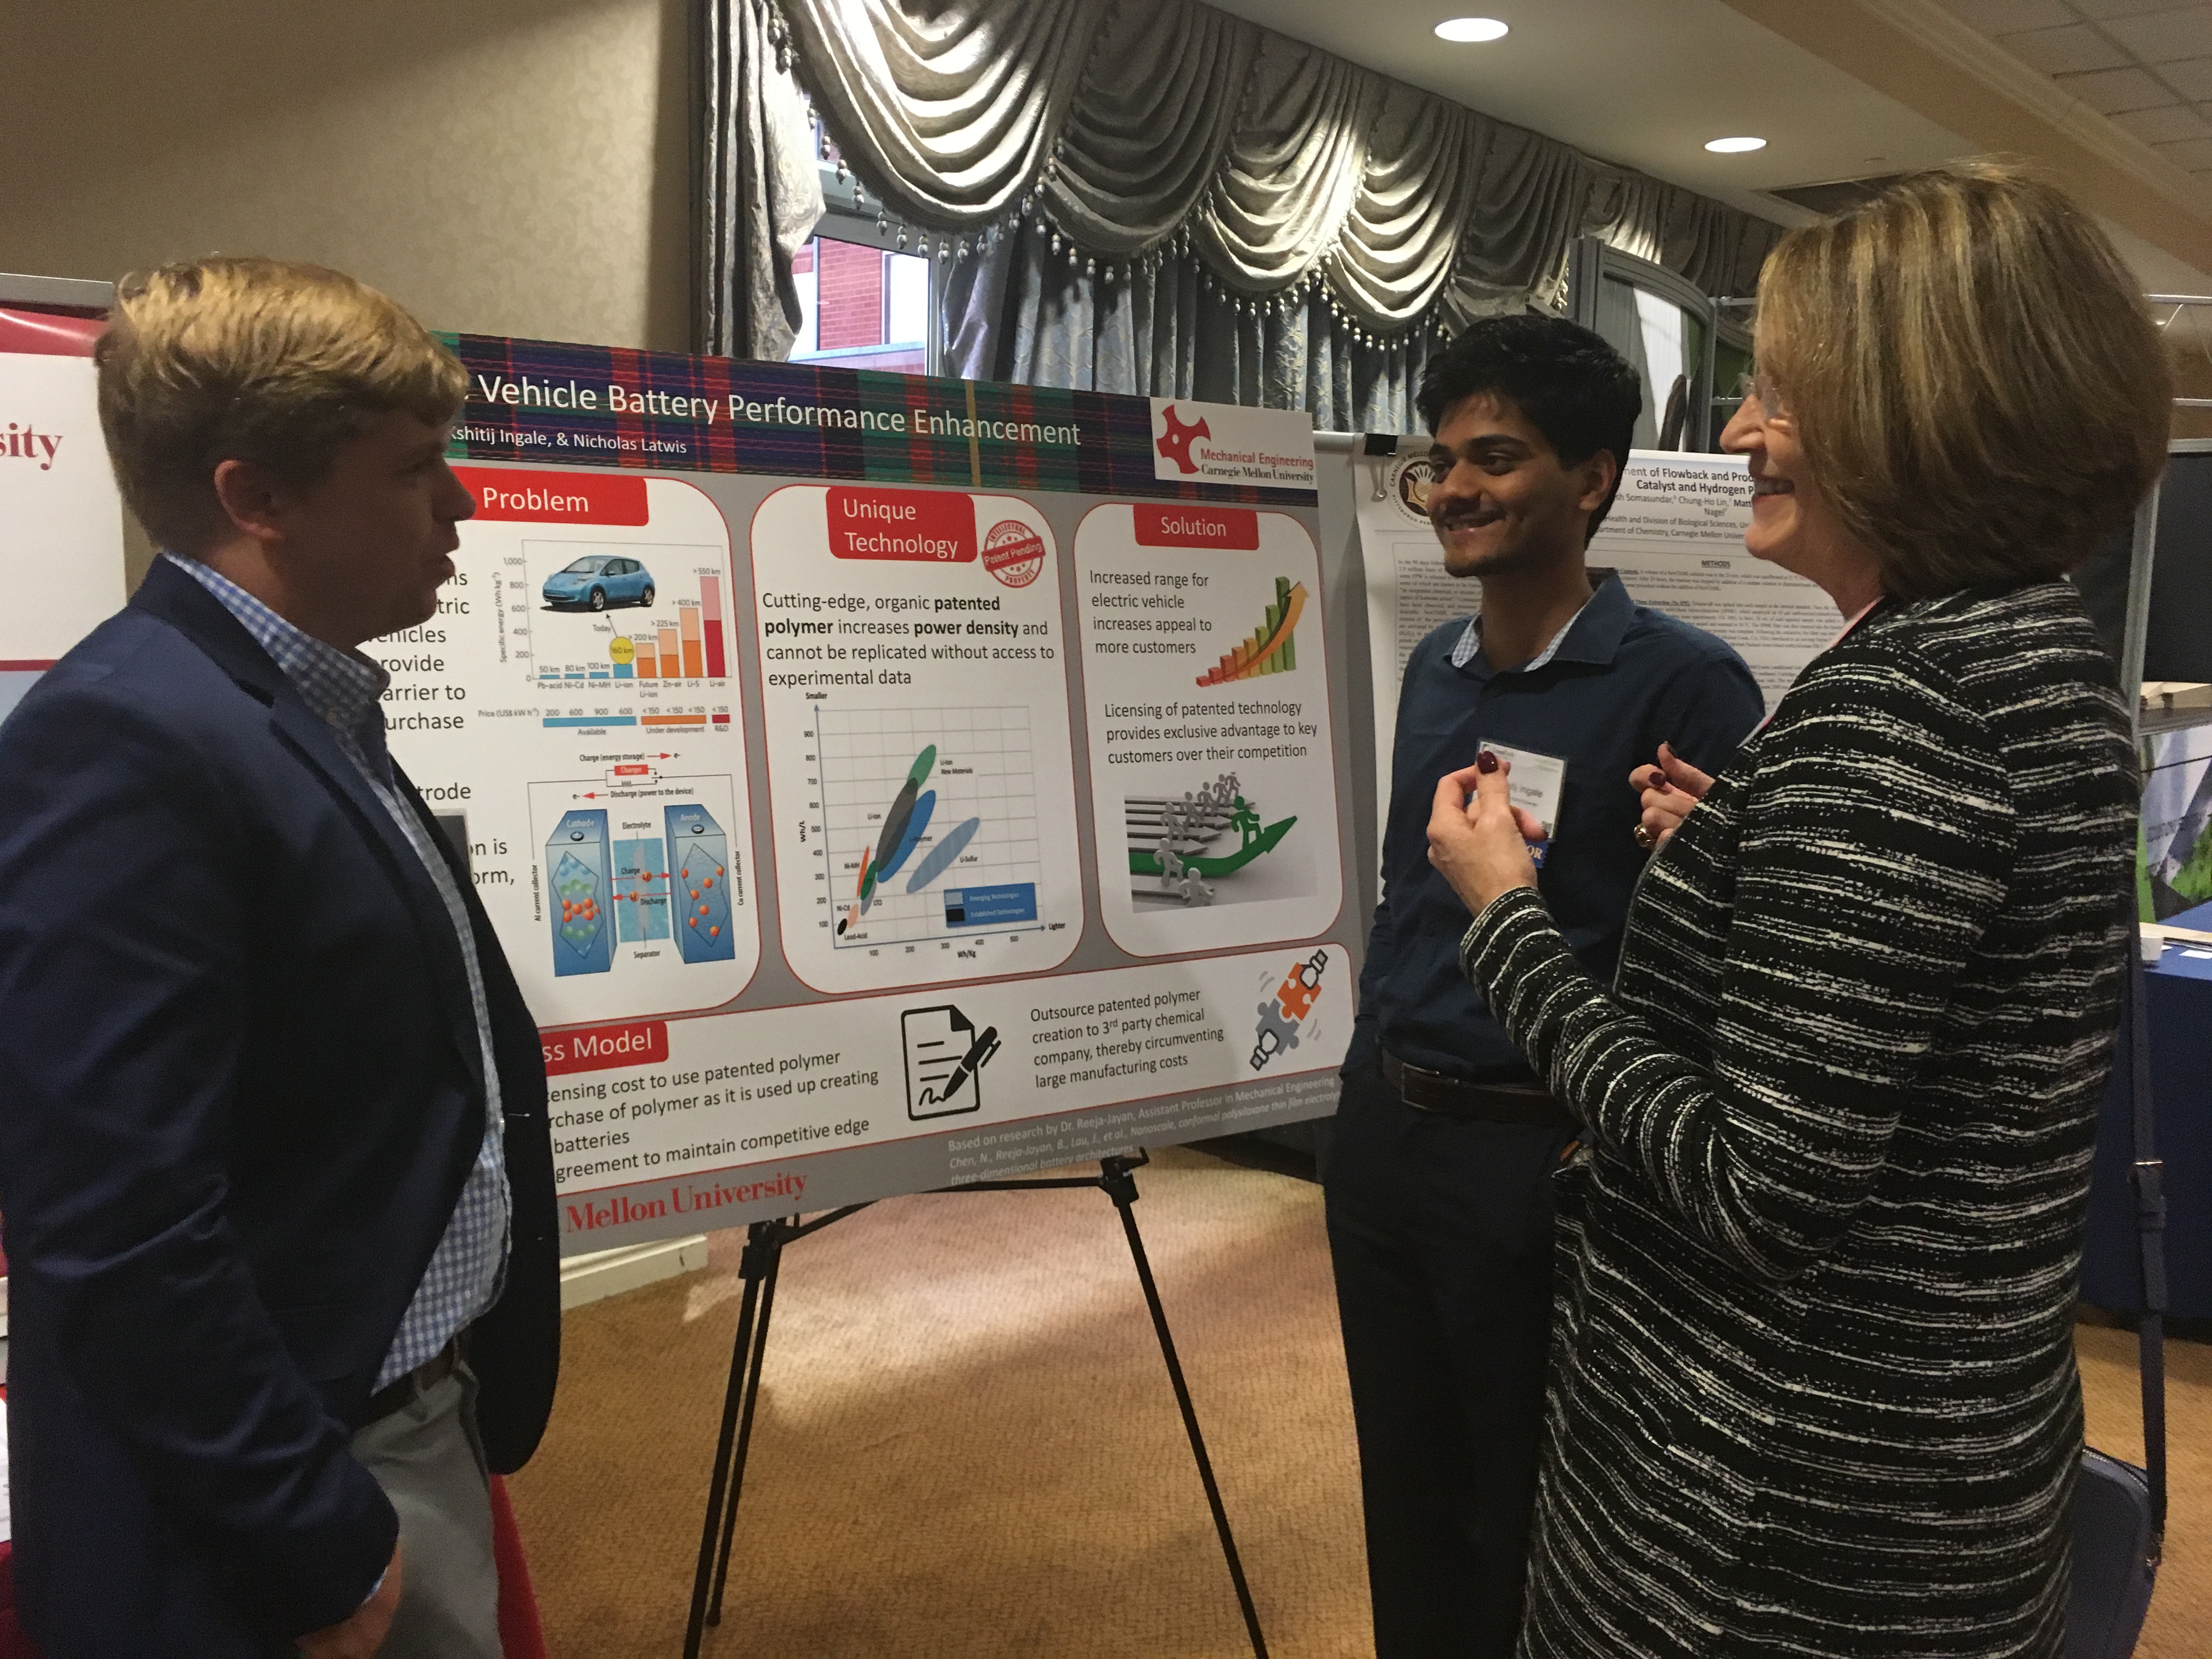 Four CMU student teams presented technology innovation posters developed in an “Energy Innovation and Entrepreneurship” course taught by CMU Engineering and Public Policy Professor and Scott Institute for Energy Innovation Associate Director for Policy Outreach Dr. Deborah Stine.